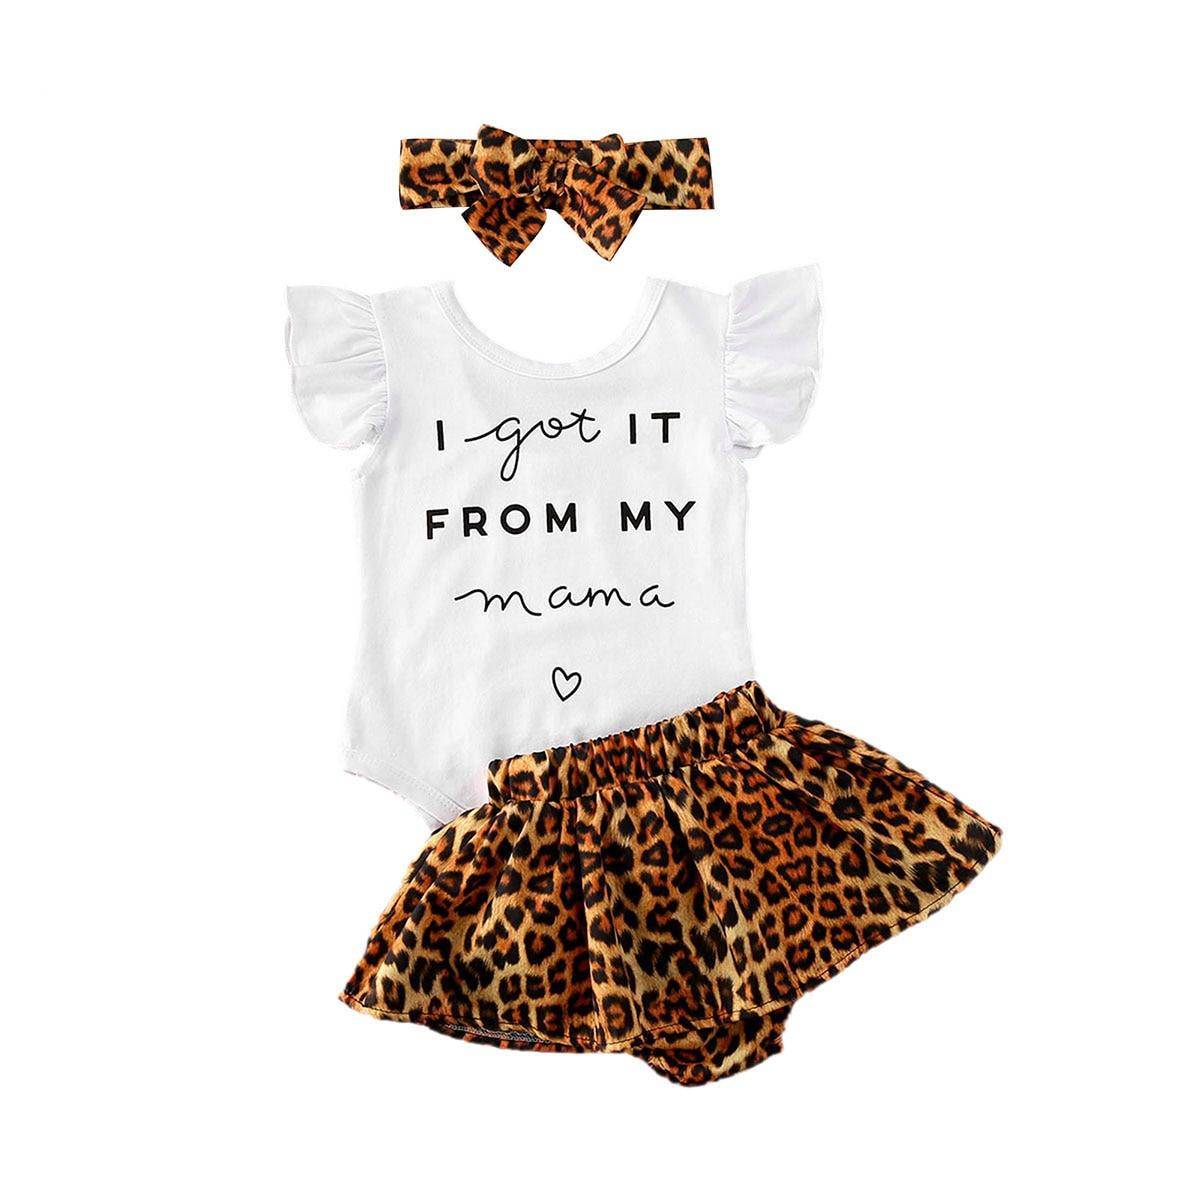 Leopard Printed Clothing Set For Girls